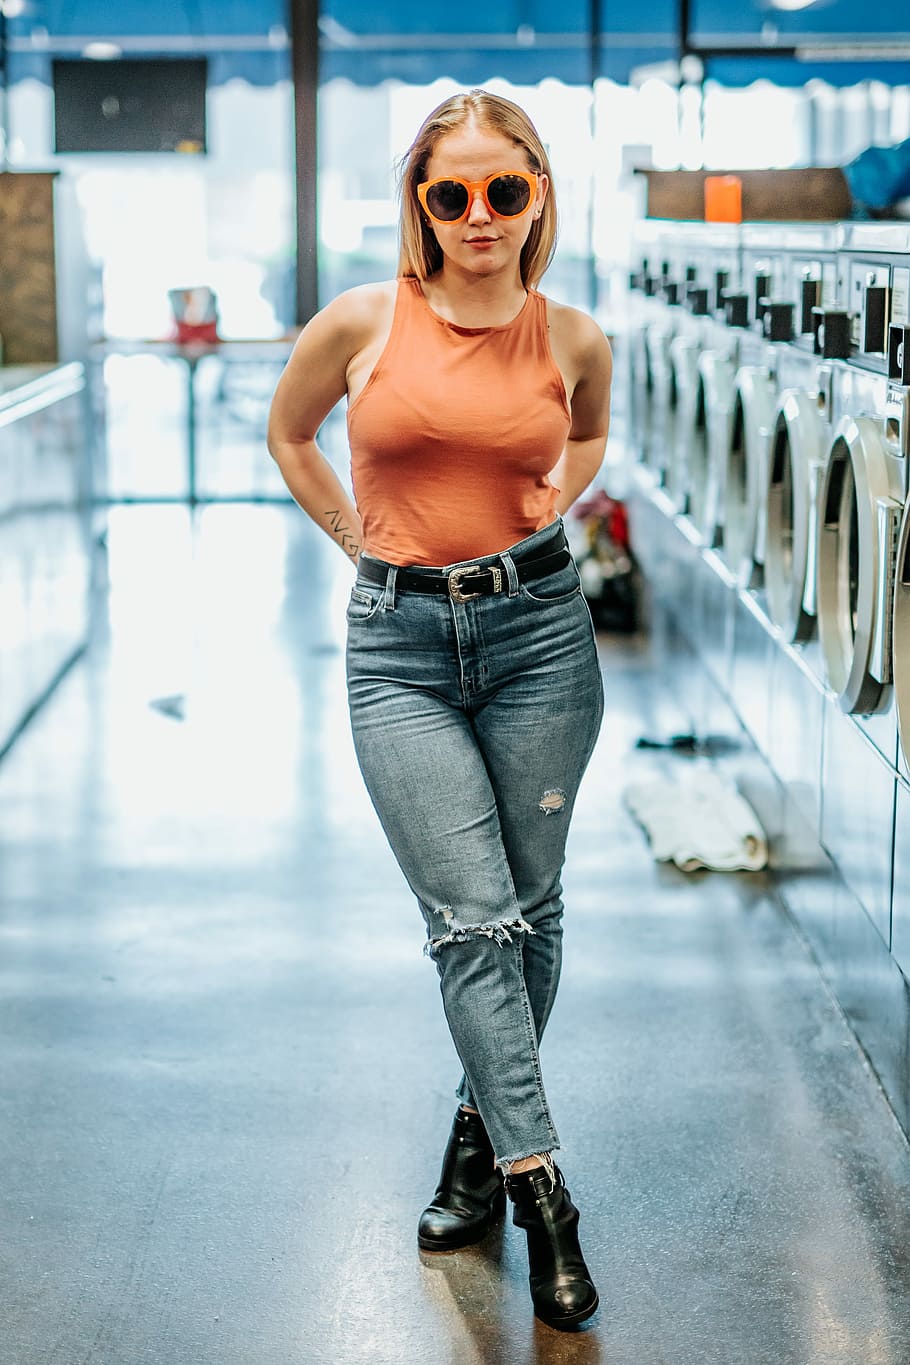 woman wearing orange sleeveless top and blue denim jeans standing near front-load laundry appliances